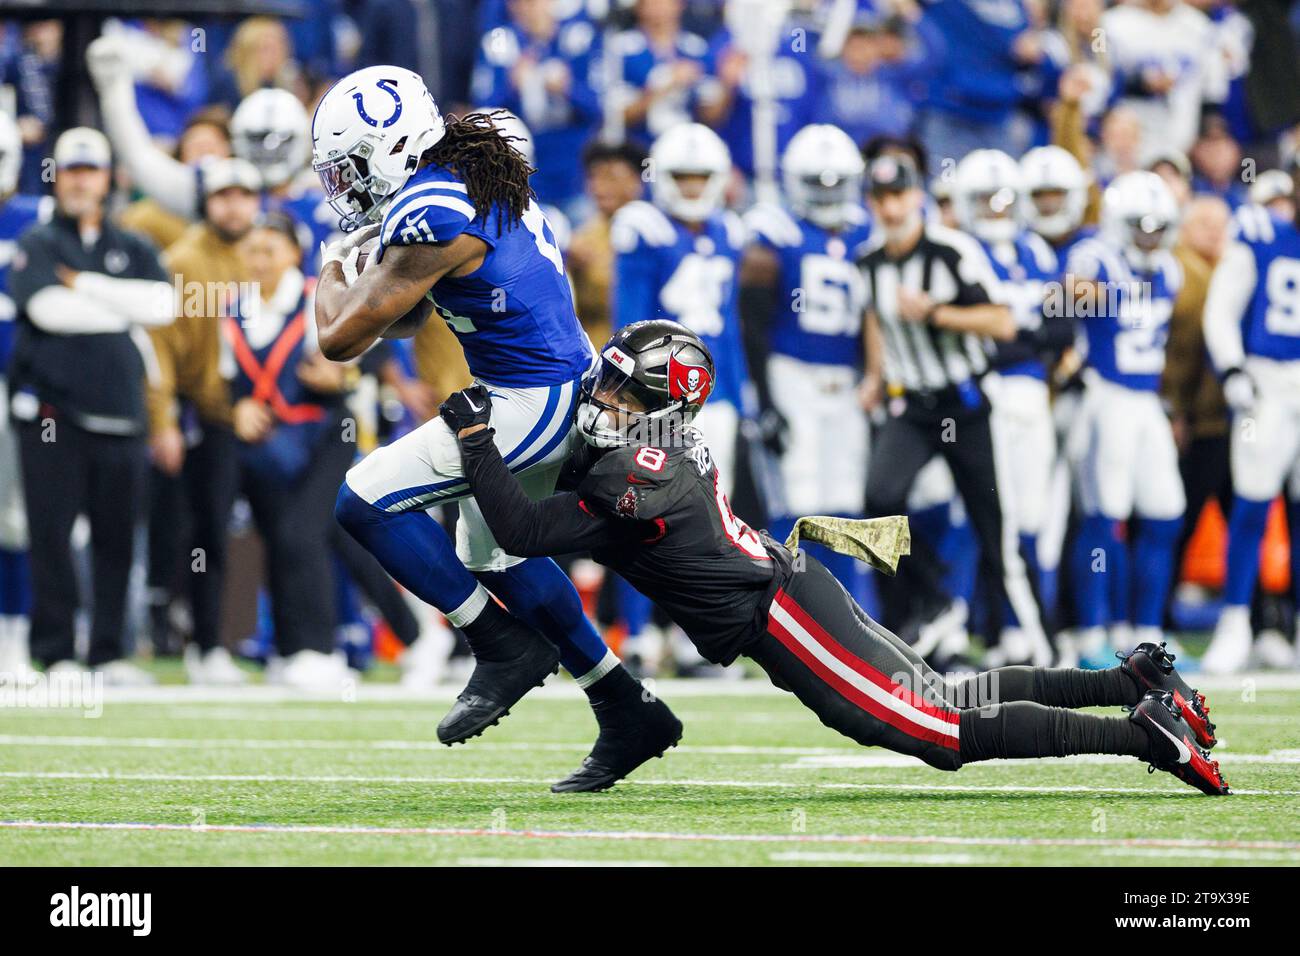 Indianapolis, Indiana, USA. 26th Nov, 2023. Indianapolis Colts tight end Mo Alie-Cox (81) runs with the ball after the catch as Tampa Bay Buccaneers linebacker SirVocea Dennis (8) defends during NFL football game action at Lucas Oil Stadium in Indianapolis, Indiana. Indianapolis defeated Tampa Bay 27-20. John Mersits/CSM/Alamy Live News Stock Photo